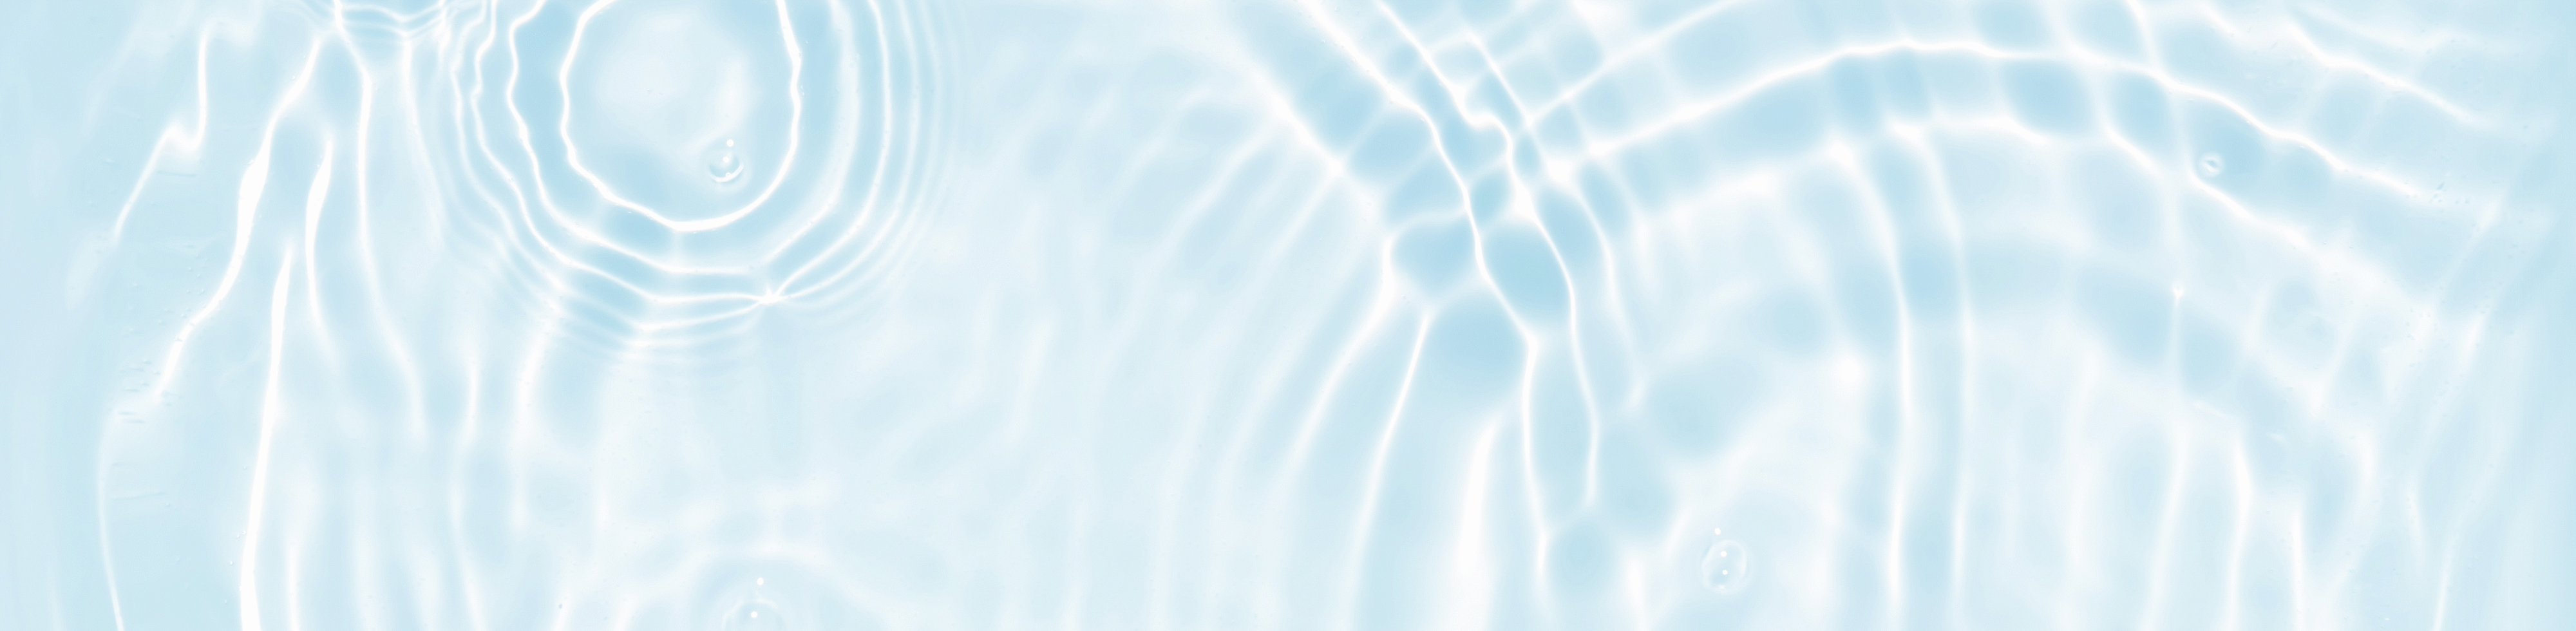 Image of water with ripples